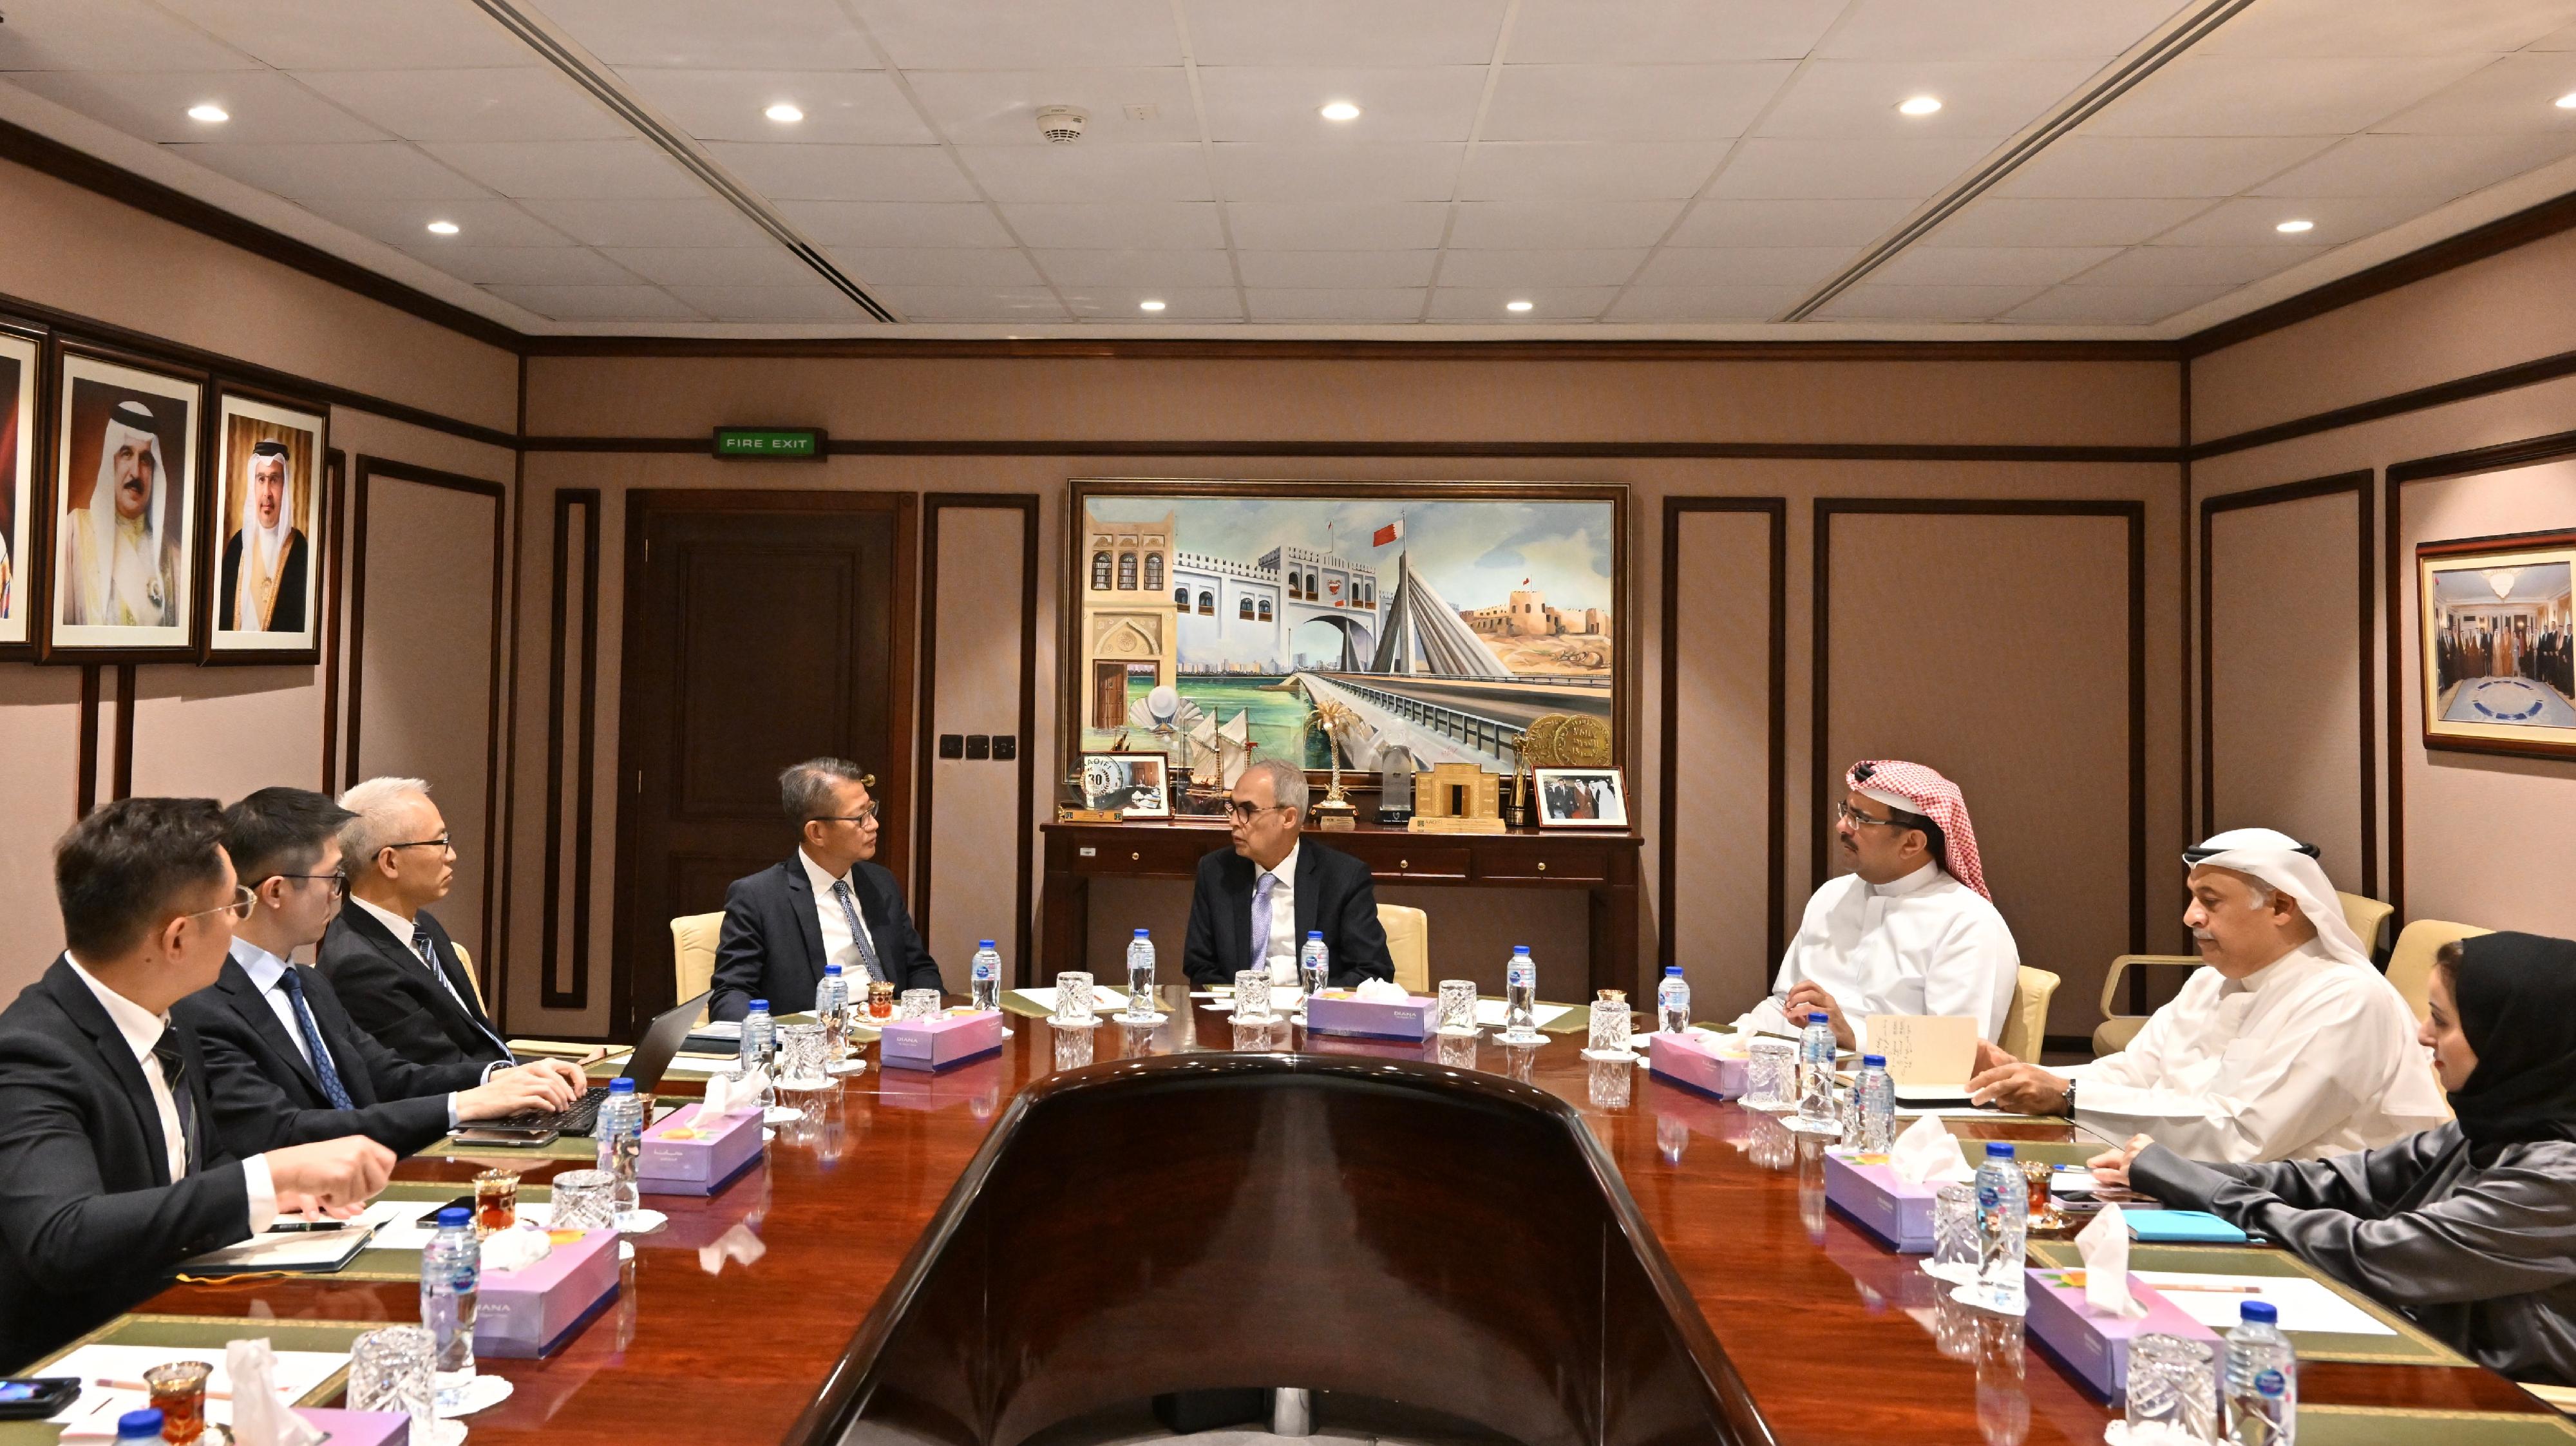 The Financial Secretary, Mr Paul Chan, kick started his official visit to Bahrain on October 23 (Bahrain time). Photo shows Mr Chan (fourth left) meeting with the Governor of the Central Bank of Bahrain, Mr Rasheed Mohammed Al Maraj (fourth right).